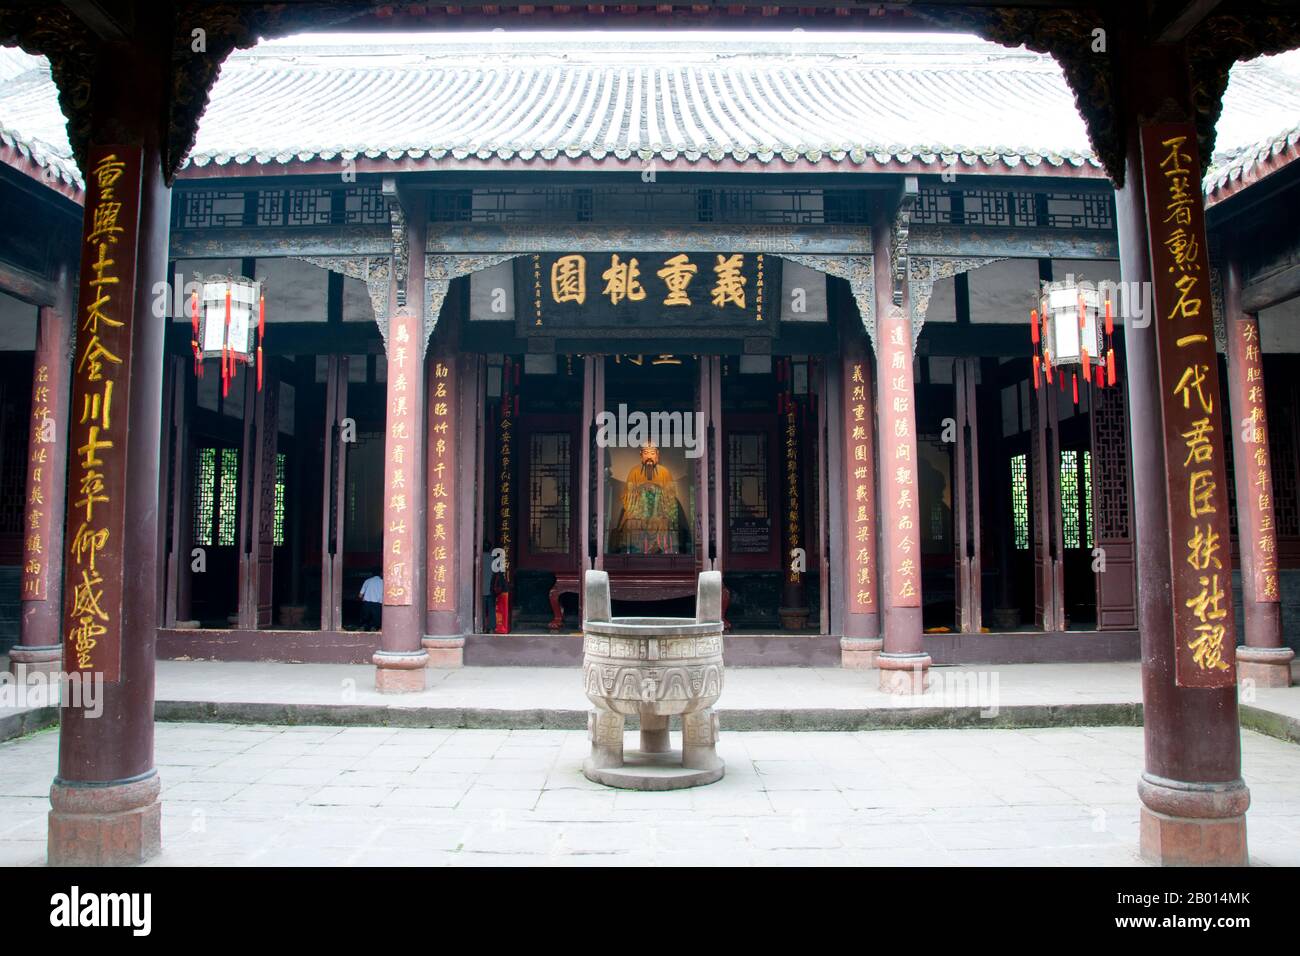 China: Wuhou Ci (Wuhou Ancestral or Memorial Hall), Chengdu, Sichuan Province.  Wuhou Ci is dedicated to Zhuge Liang, hero of the classic 'The Romance of the Three Kingdoms' and his emperor, Liu Bei. Zhuge Liang (181–234) was a chancellor of Shu Han during the Three Kingdoms period of Chinese history. He is often recognised as the greatest and most accomplished strategist of his era.  Chengdu, known formerly as Chengtu, is the capital of Sichuan province in Southwest China. In the early 4th century BC, the 9th Kaiming king of the ancient Shu moved his capital to the city's current location. Stock Photo